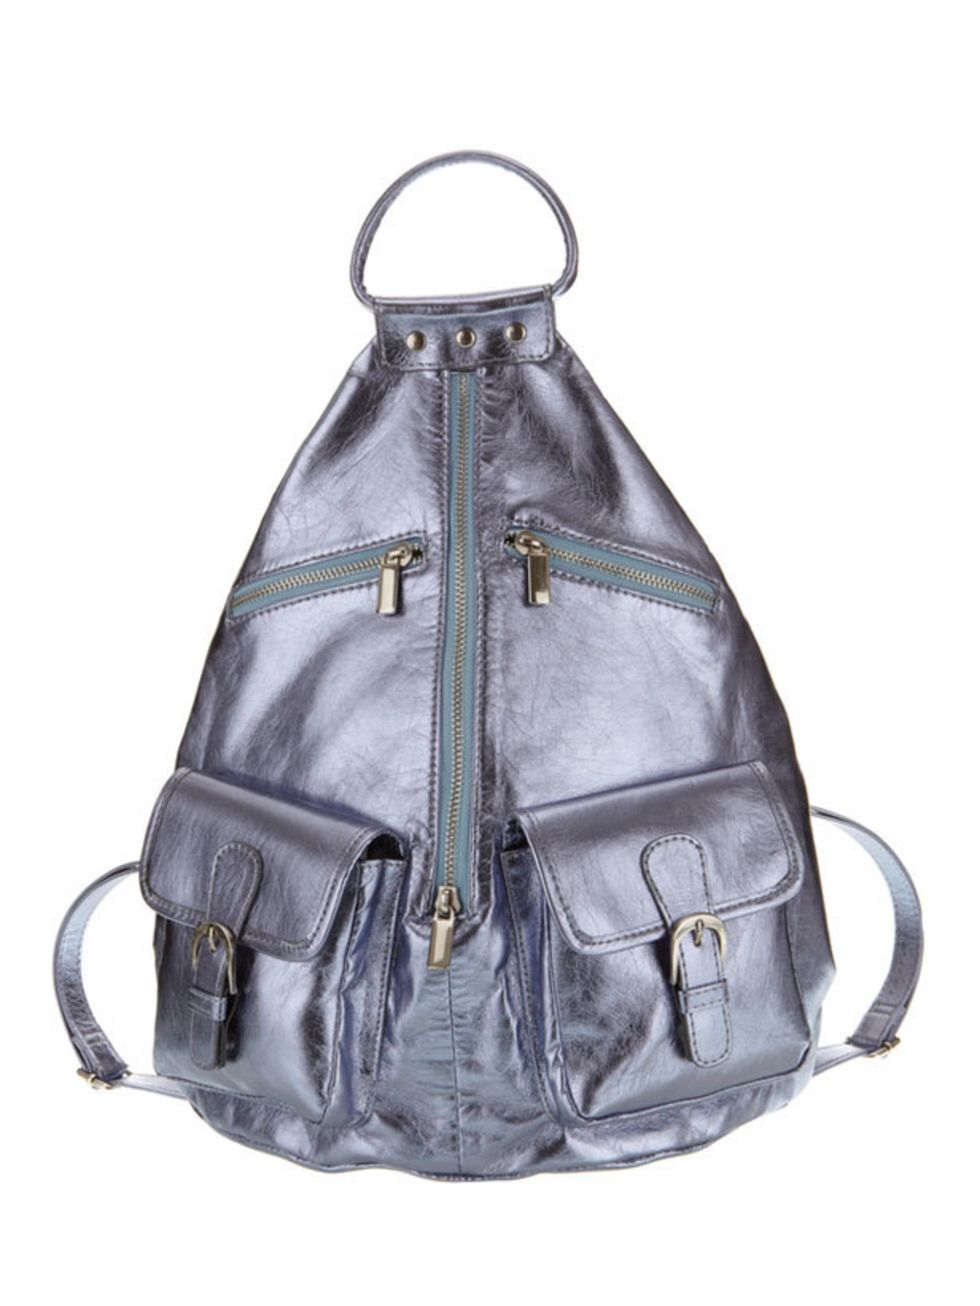 <p>Topshop metallic backpack, £38, for stockists call 0845 121 4519</p>